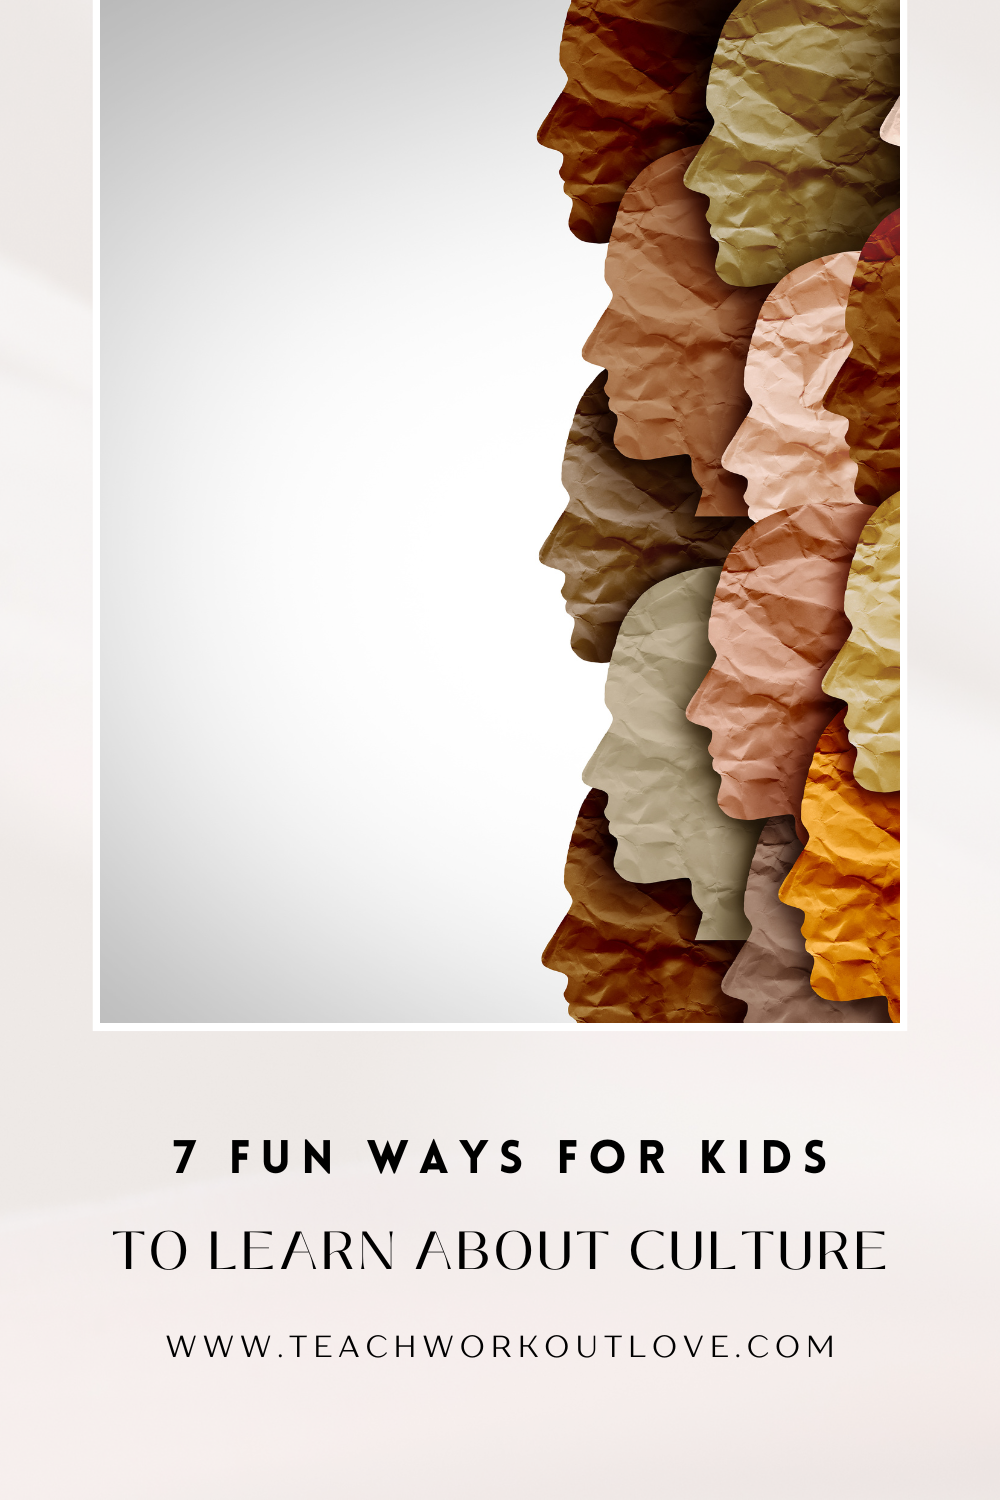 Every parent wants to give their kids a head start in life. One of the best things you can do is to expose them to different cultures. By learning about other cultures, kids can better understand the world around them. They will also learn how to interact with people from other backgrounds. Here are some fun ways to get your kids to learn about other cultures: